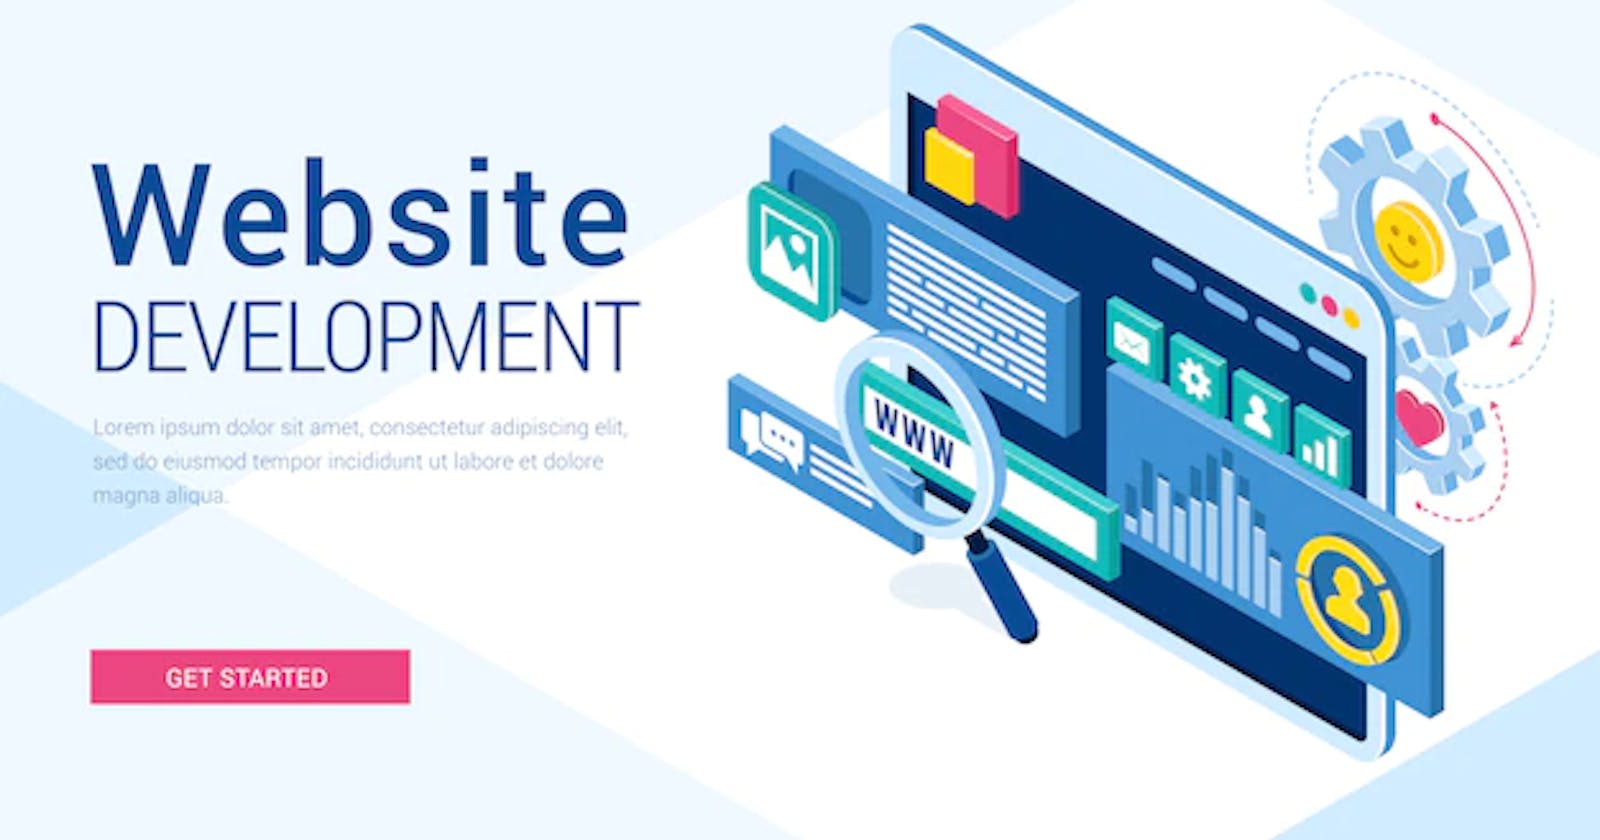 Knowledge about the Website Development